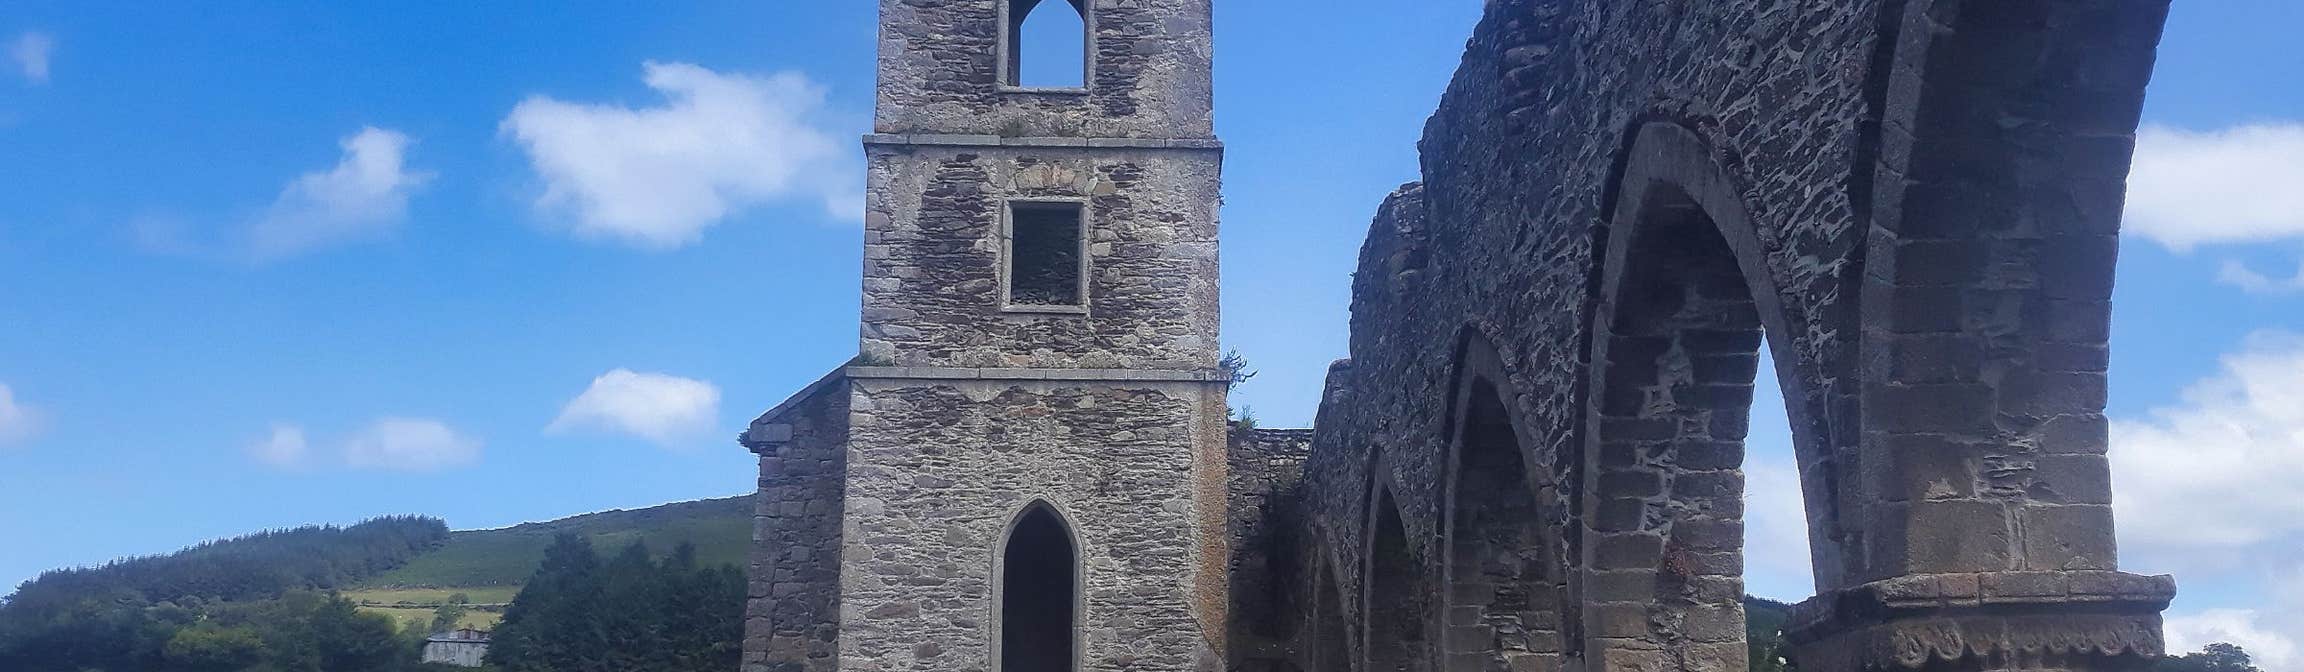 Image of Baltinglass in County Wicklow